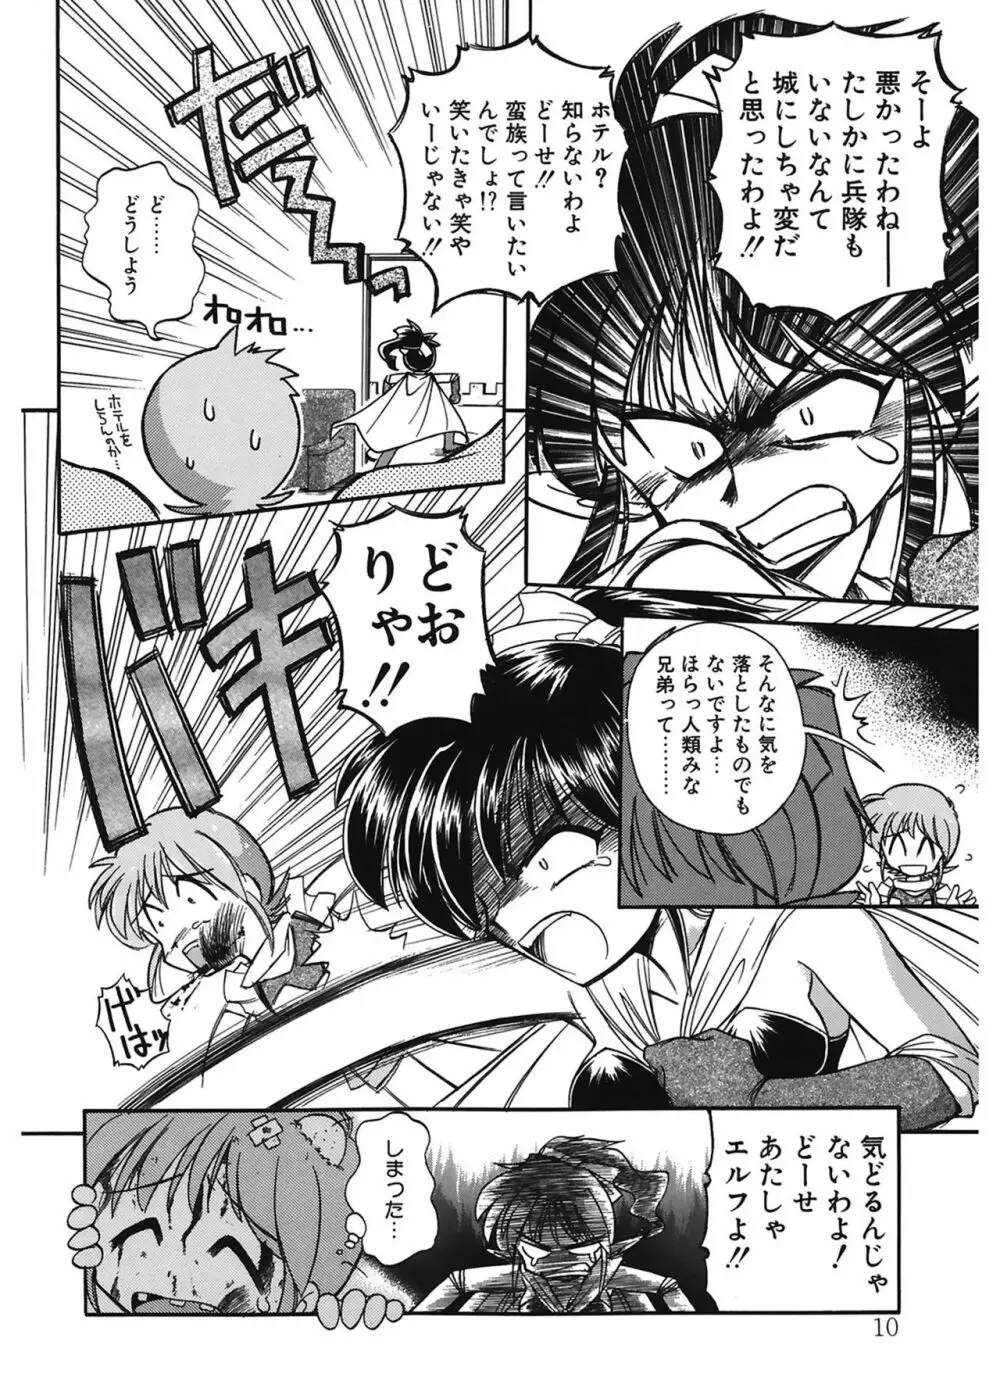 JACK UP featuring徳川玄徳 Page.10